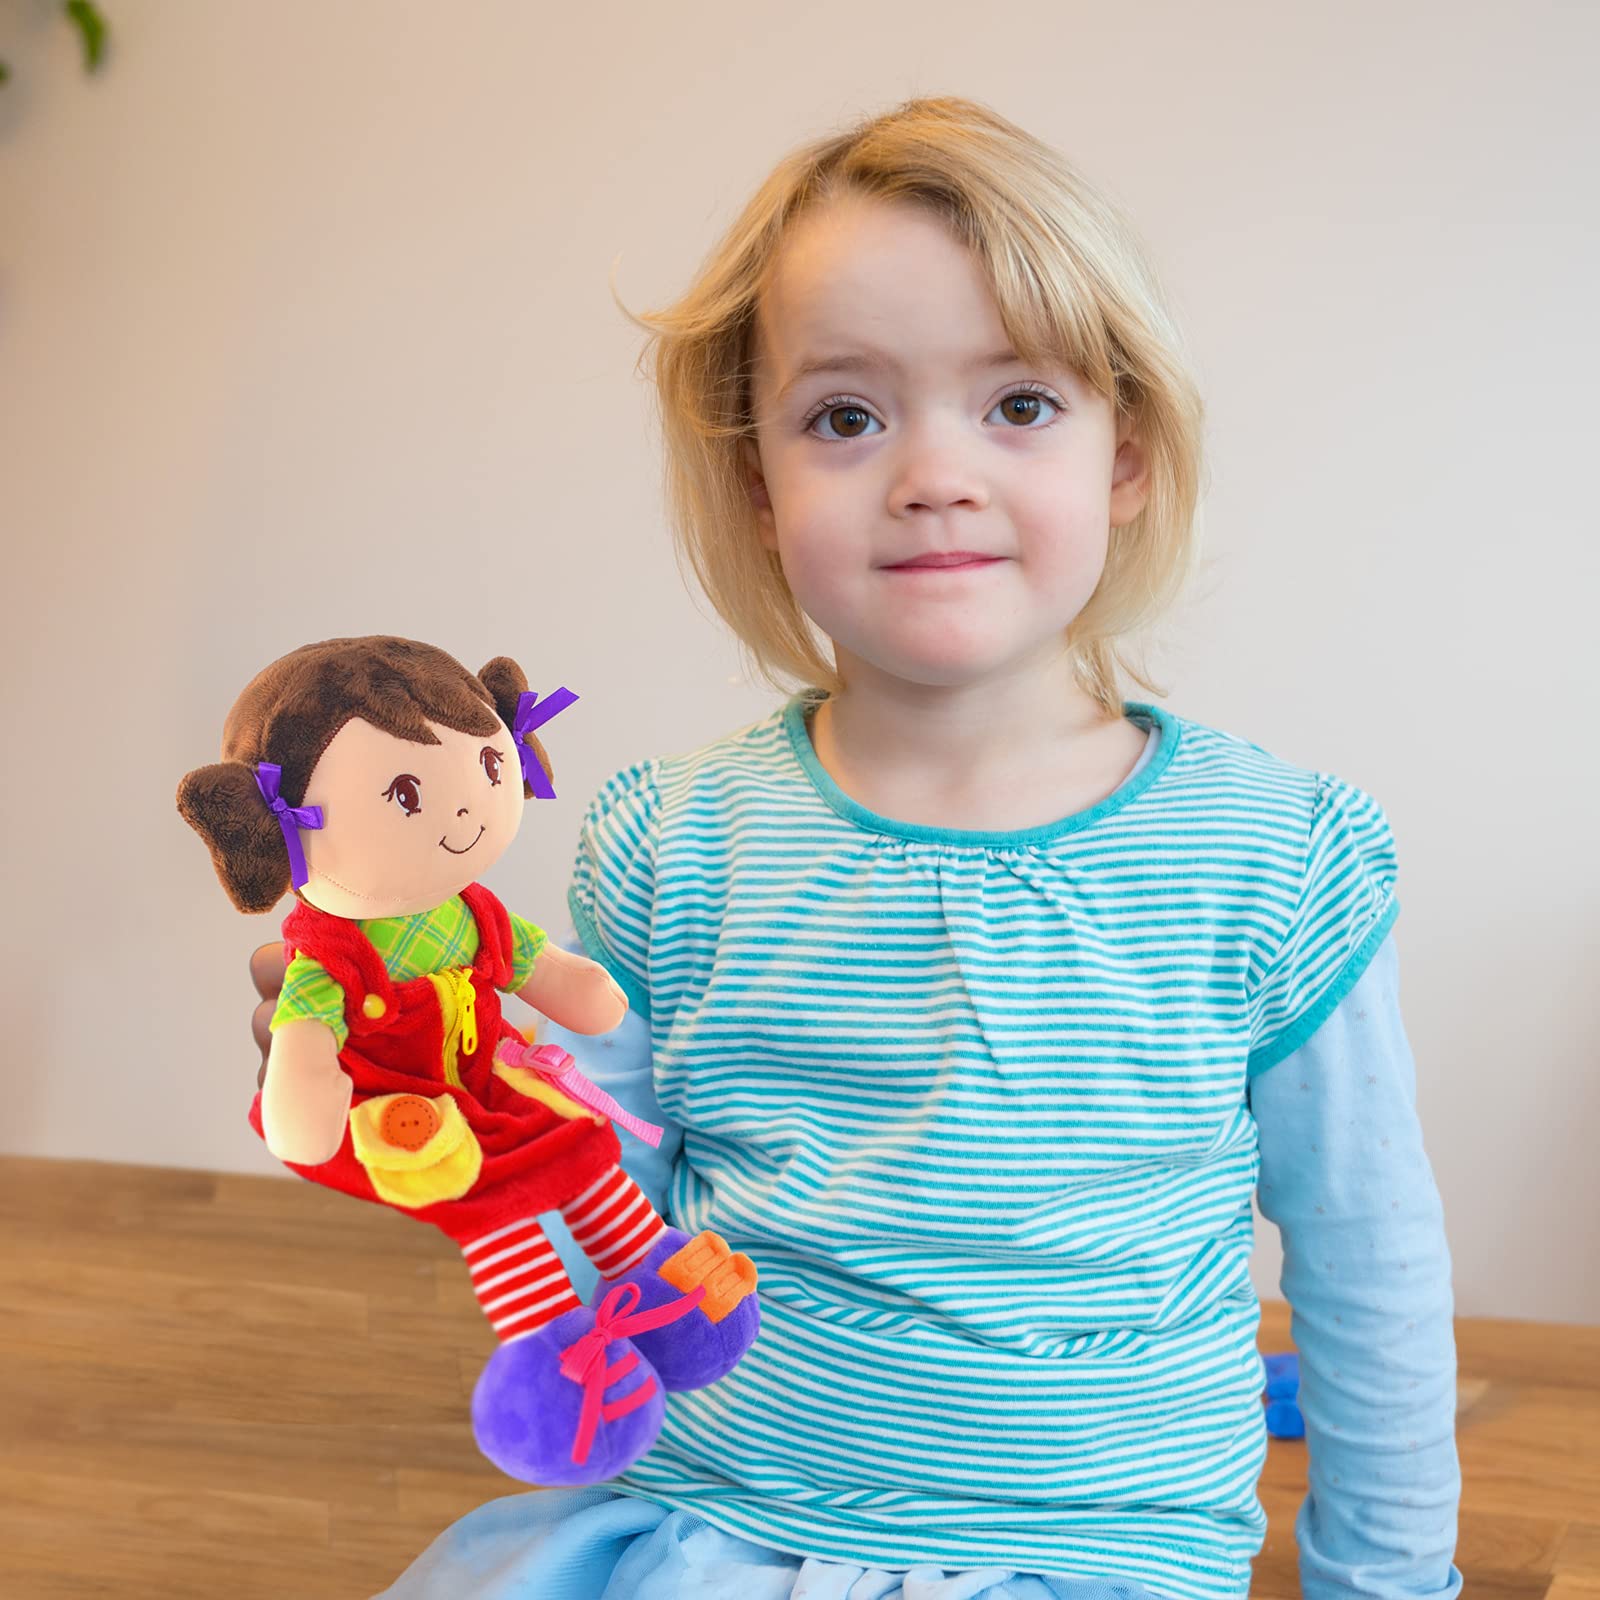 Linzy Plush 16" Educational Plush Doll, Adorable Plush Doll Comes with clad ,a Removable Outfit Packed with Closures-Perfect for Testing a Little One's Growing Problem Solving and Motor Skills